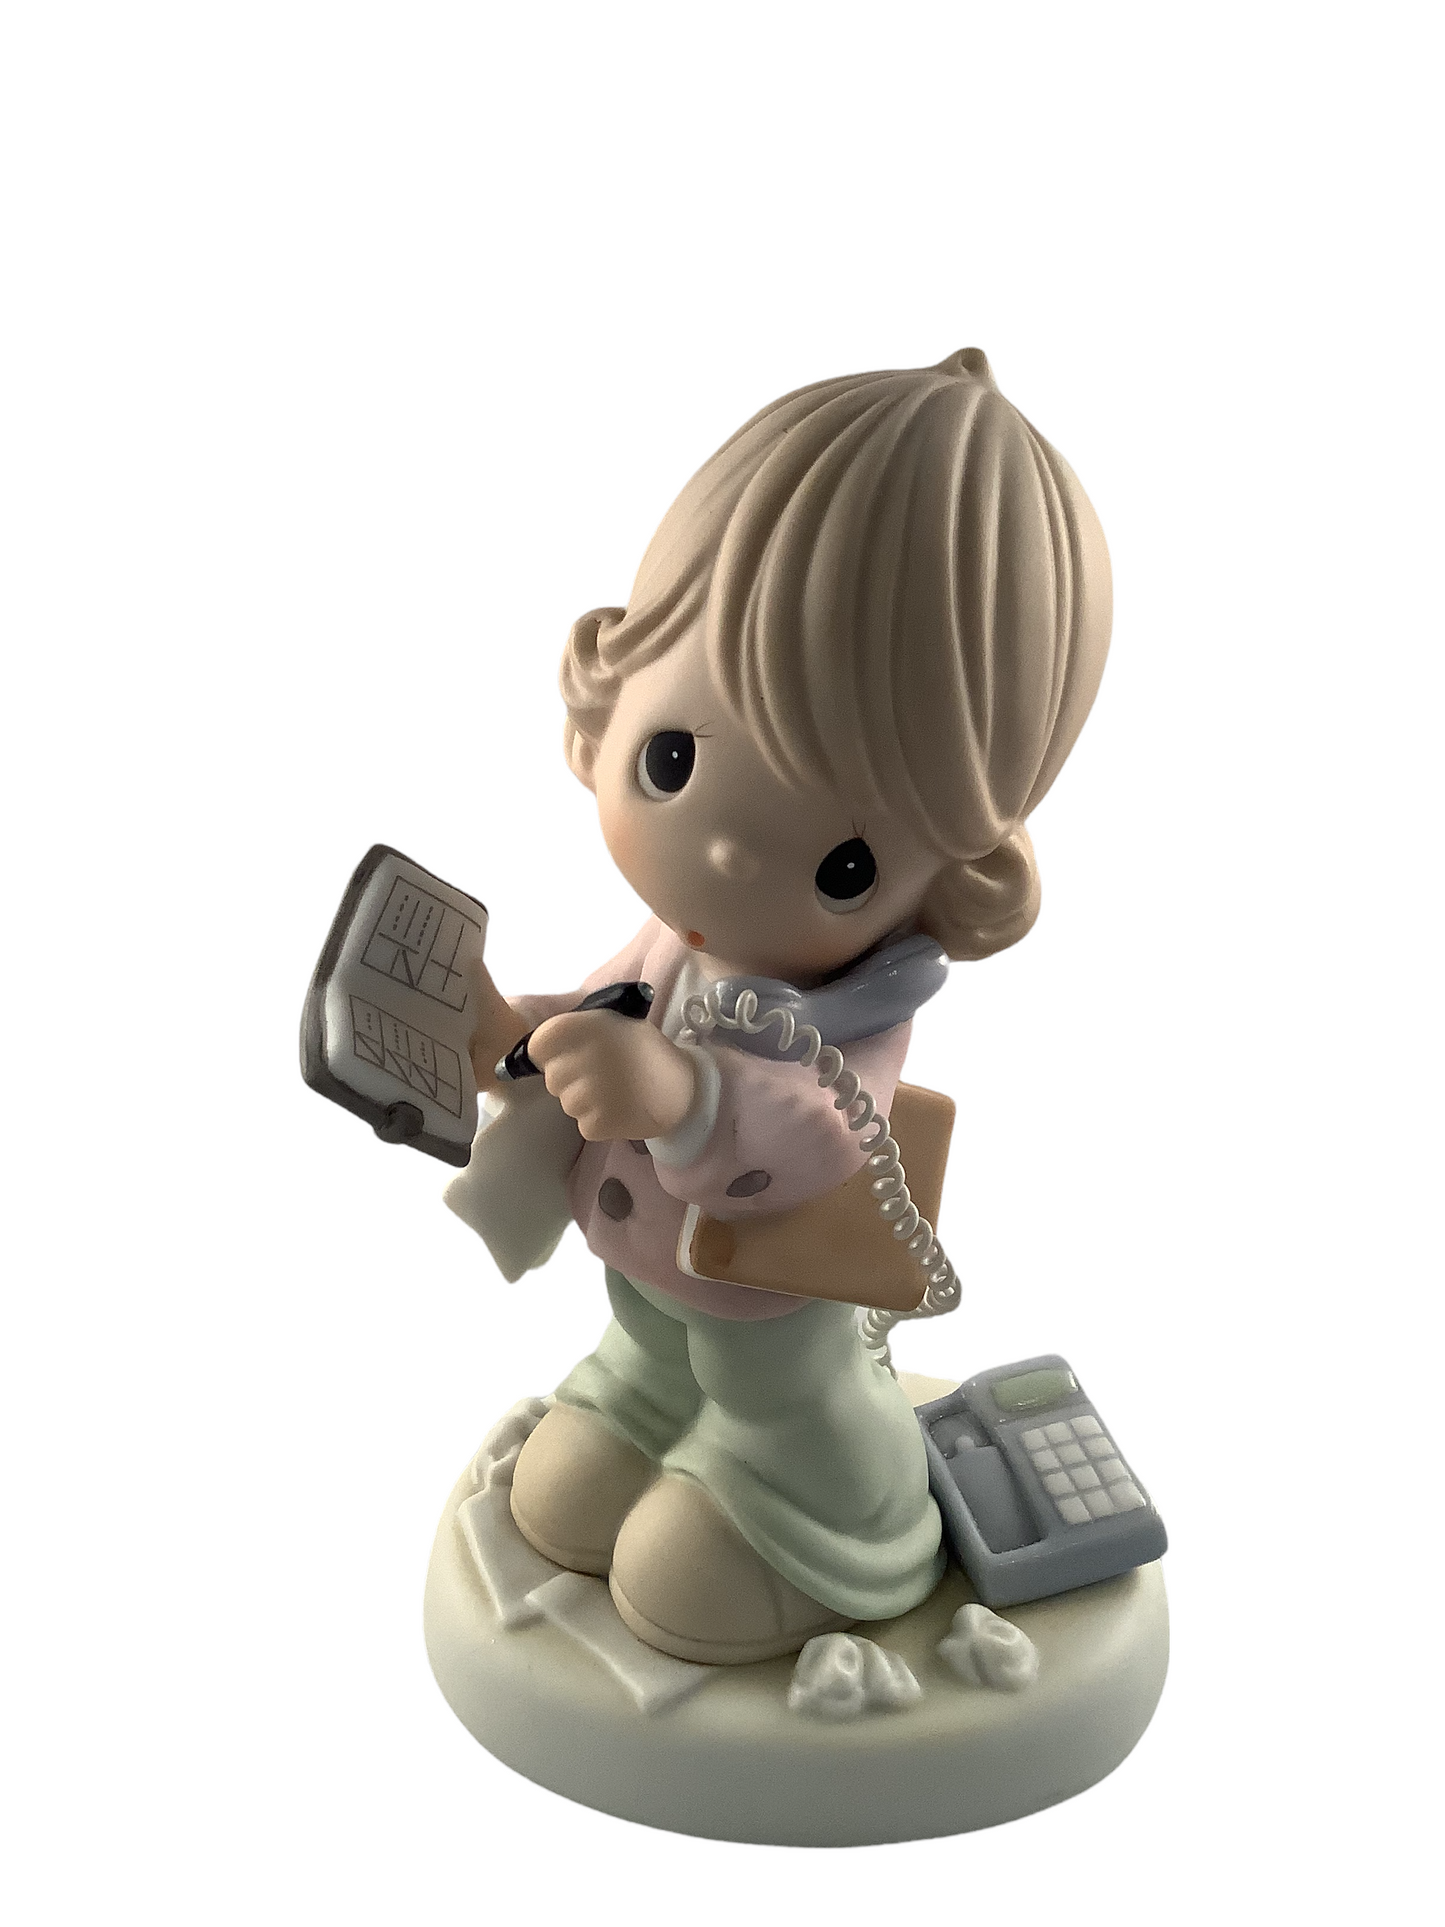 Note To Self: Take Time For Me - Precious Moment Figurine